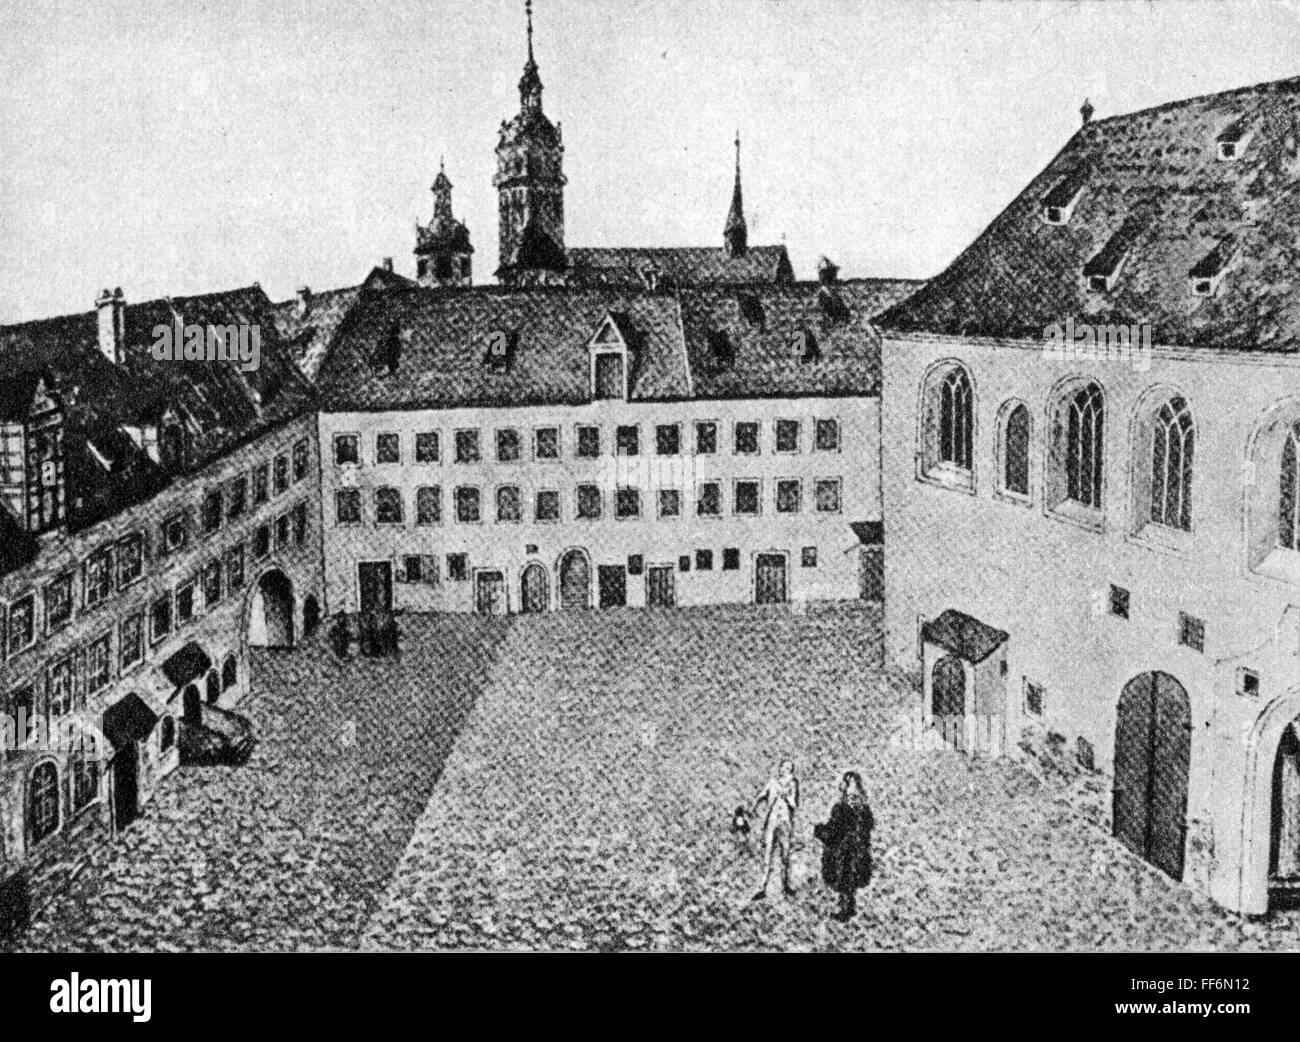 geography / travel, Germany, Leipzig, buildings, university, exterior view, Pauline courtyard, engraving, 18th century, 18th century, graphic, graphics, pedagogy, paedagogy, education, inner courtyard, inner courtyards, Saxony, East Germany, Eastern Germany, Germany, Central Europe, Europe, architecture, building, buildings, university, universities, court, courtyards, courts, in the courtyard, historic, historical, people, Additional-Rights-Clearences-Not Available Stock Photo